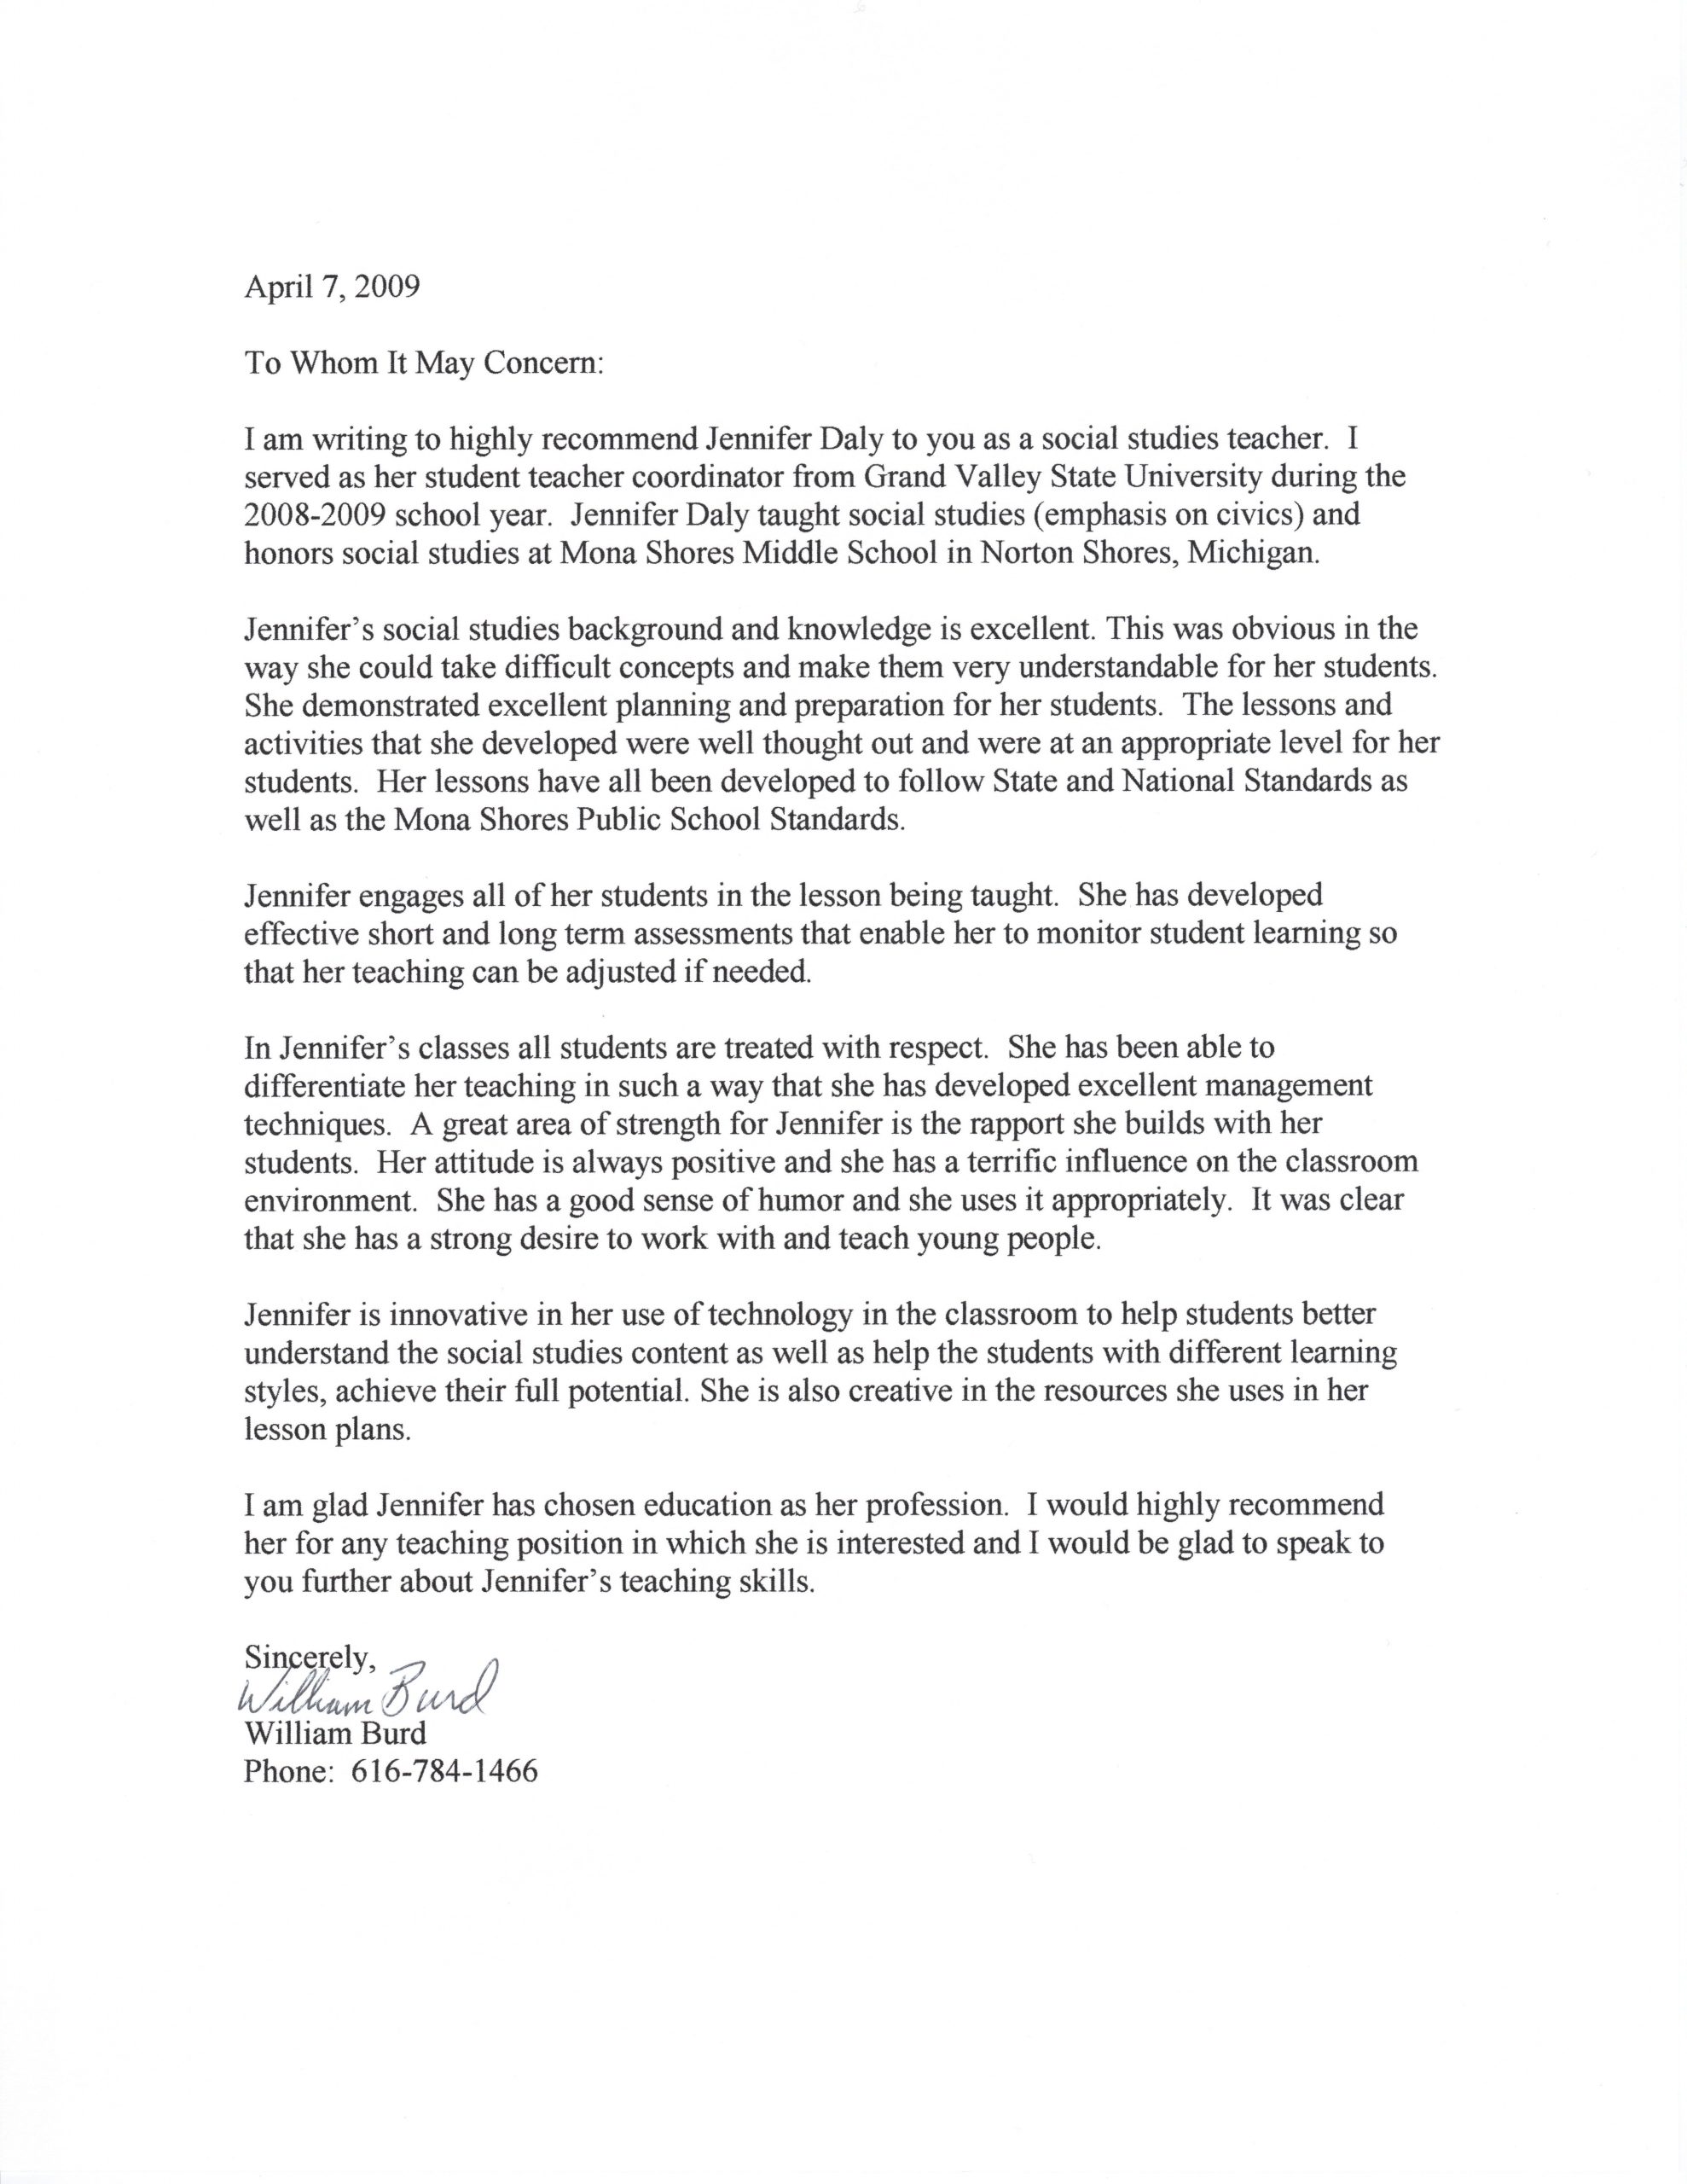 Student Teacher Recommendation Letter Examples Letter Of with size 5100 X 6600